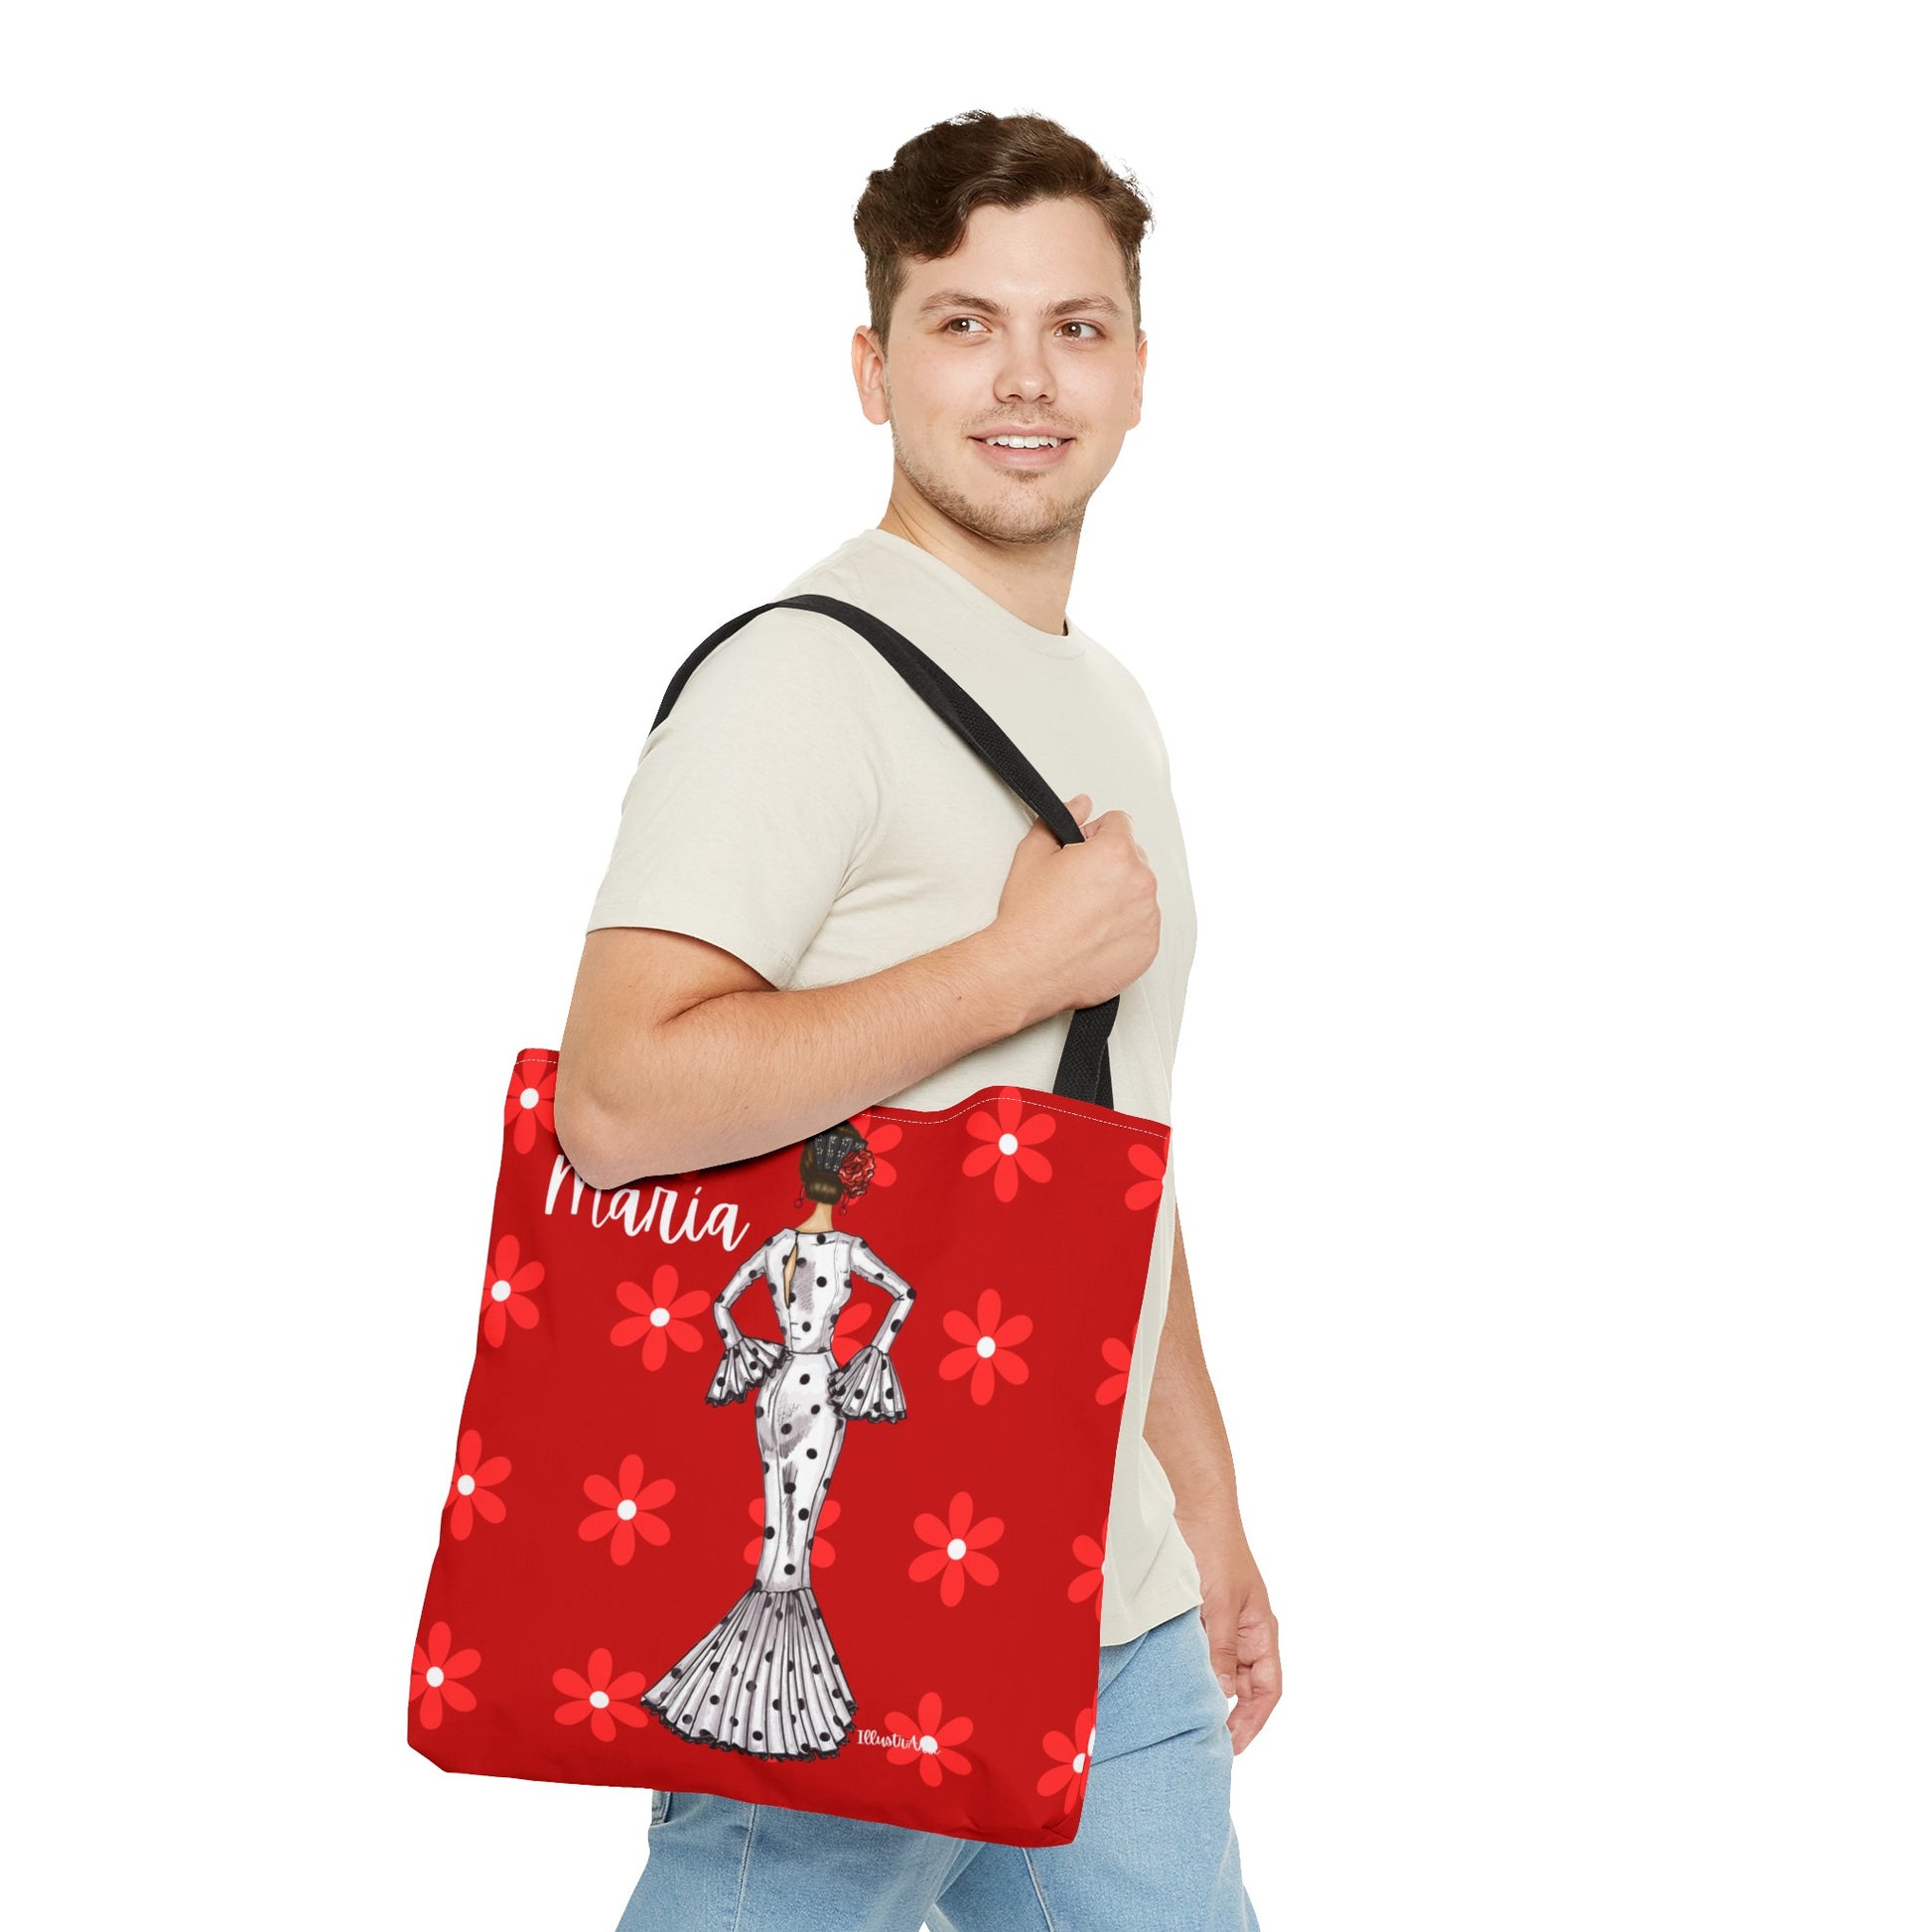 a man is holding a red bag with a picture of a woman on it